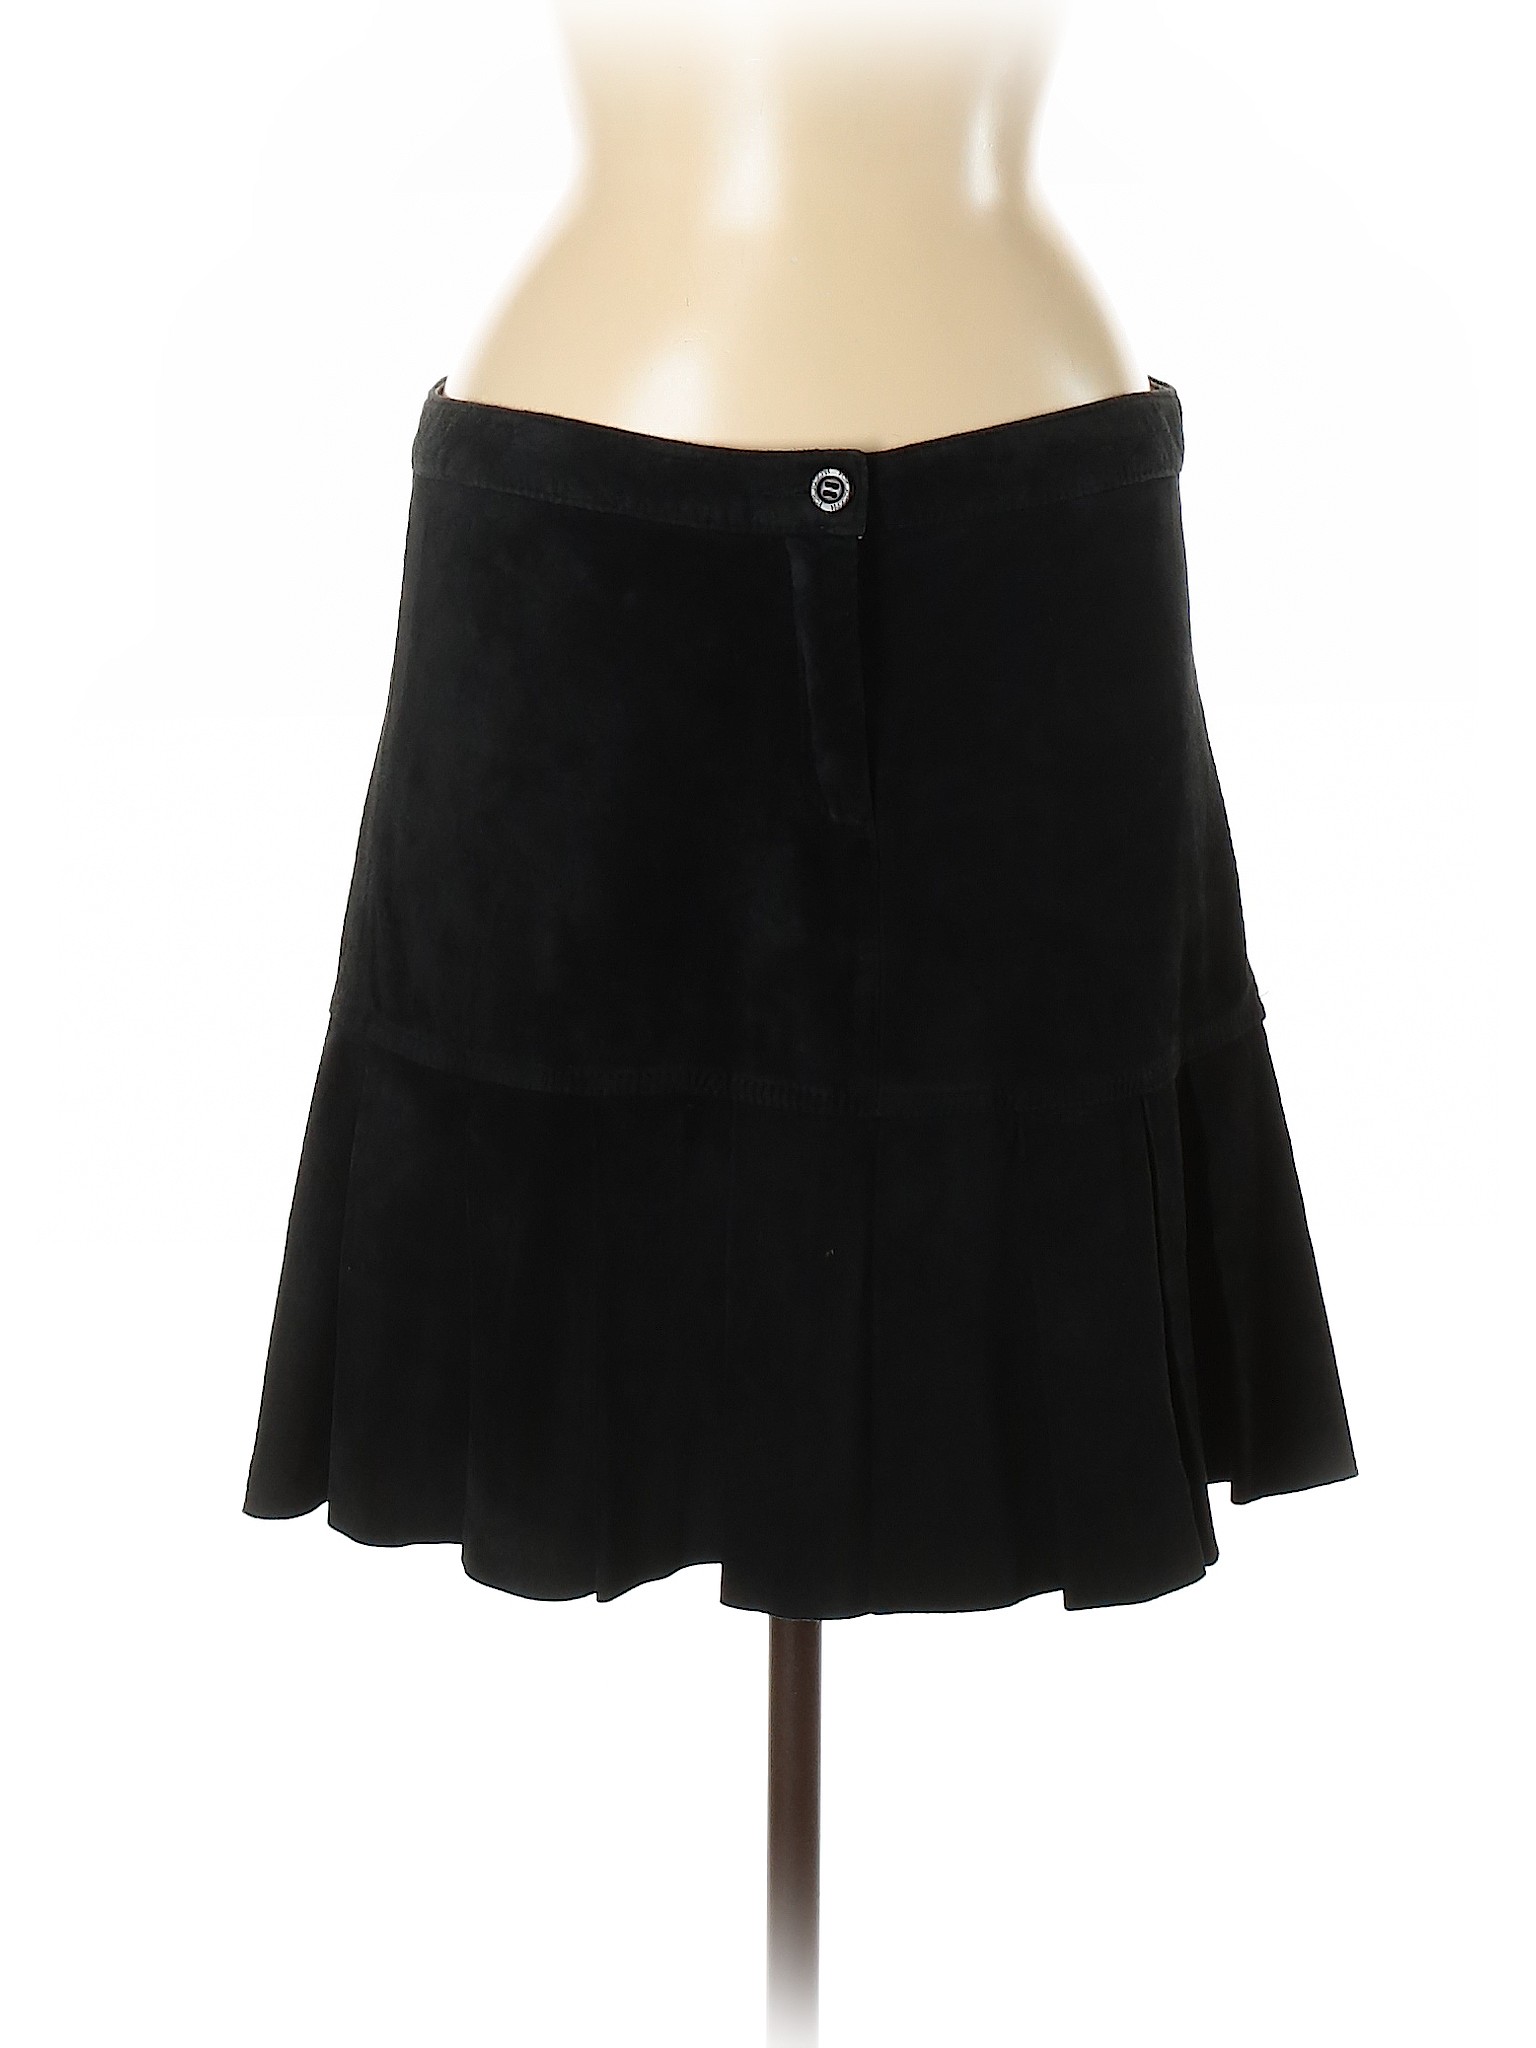 For Joseph 100% Leather Solid Black Leather Skirt Size 8 - 73% off ...